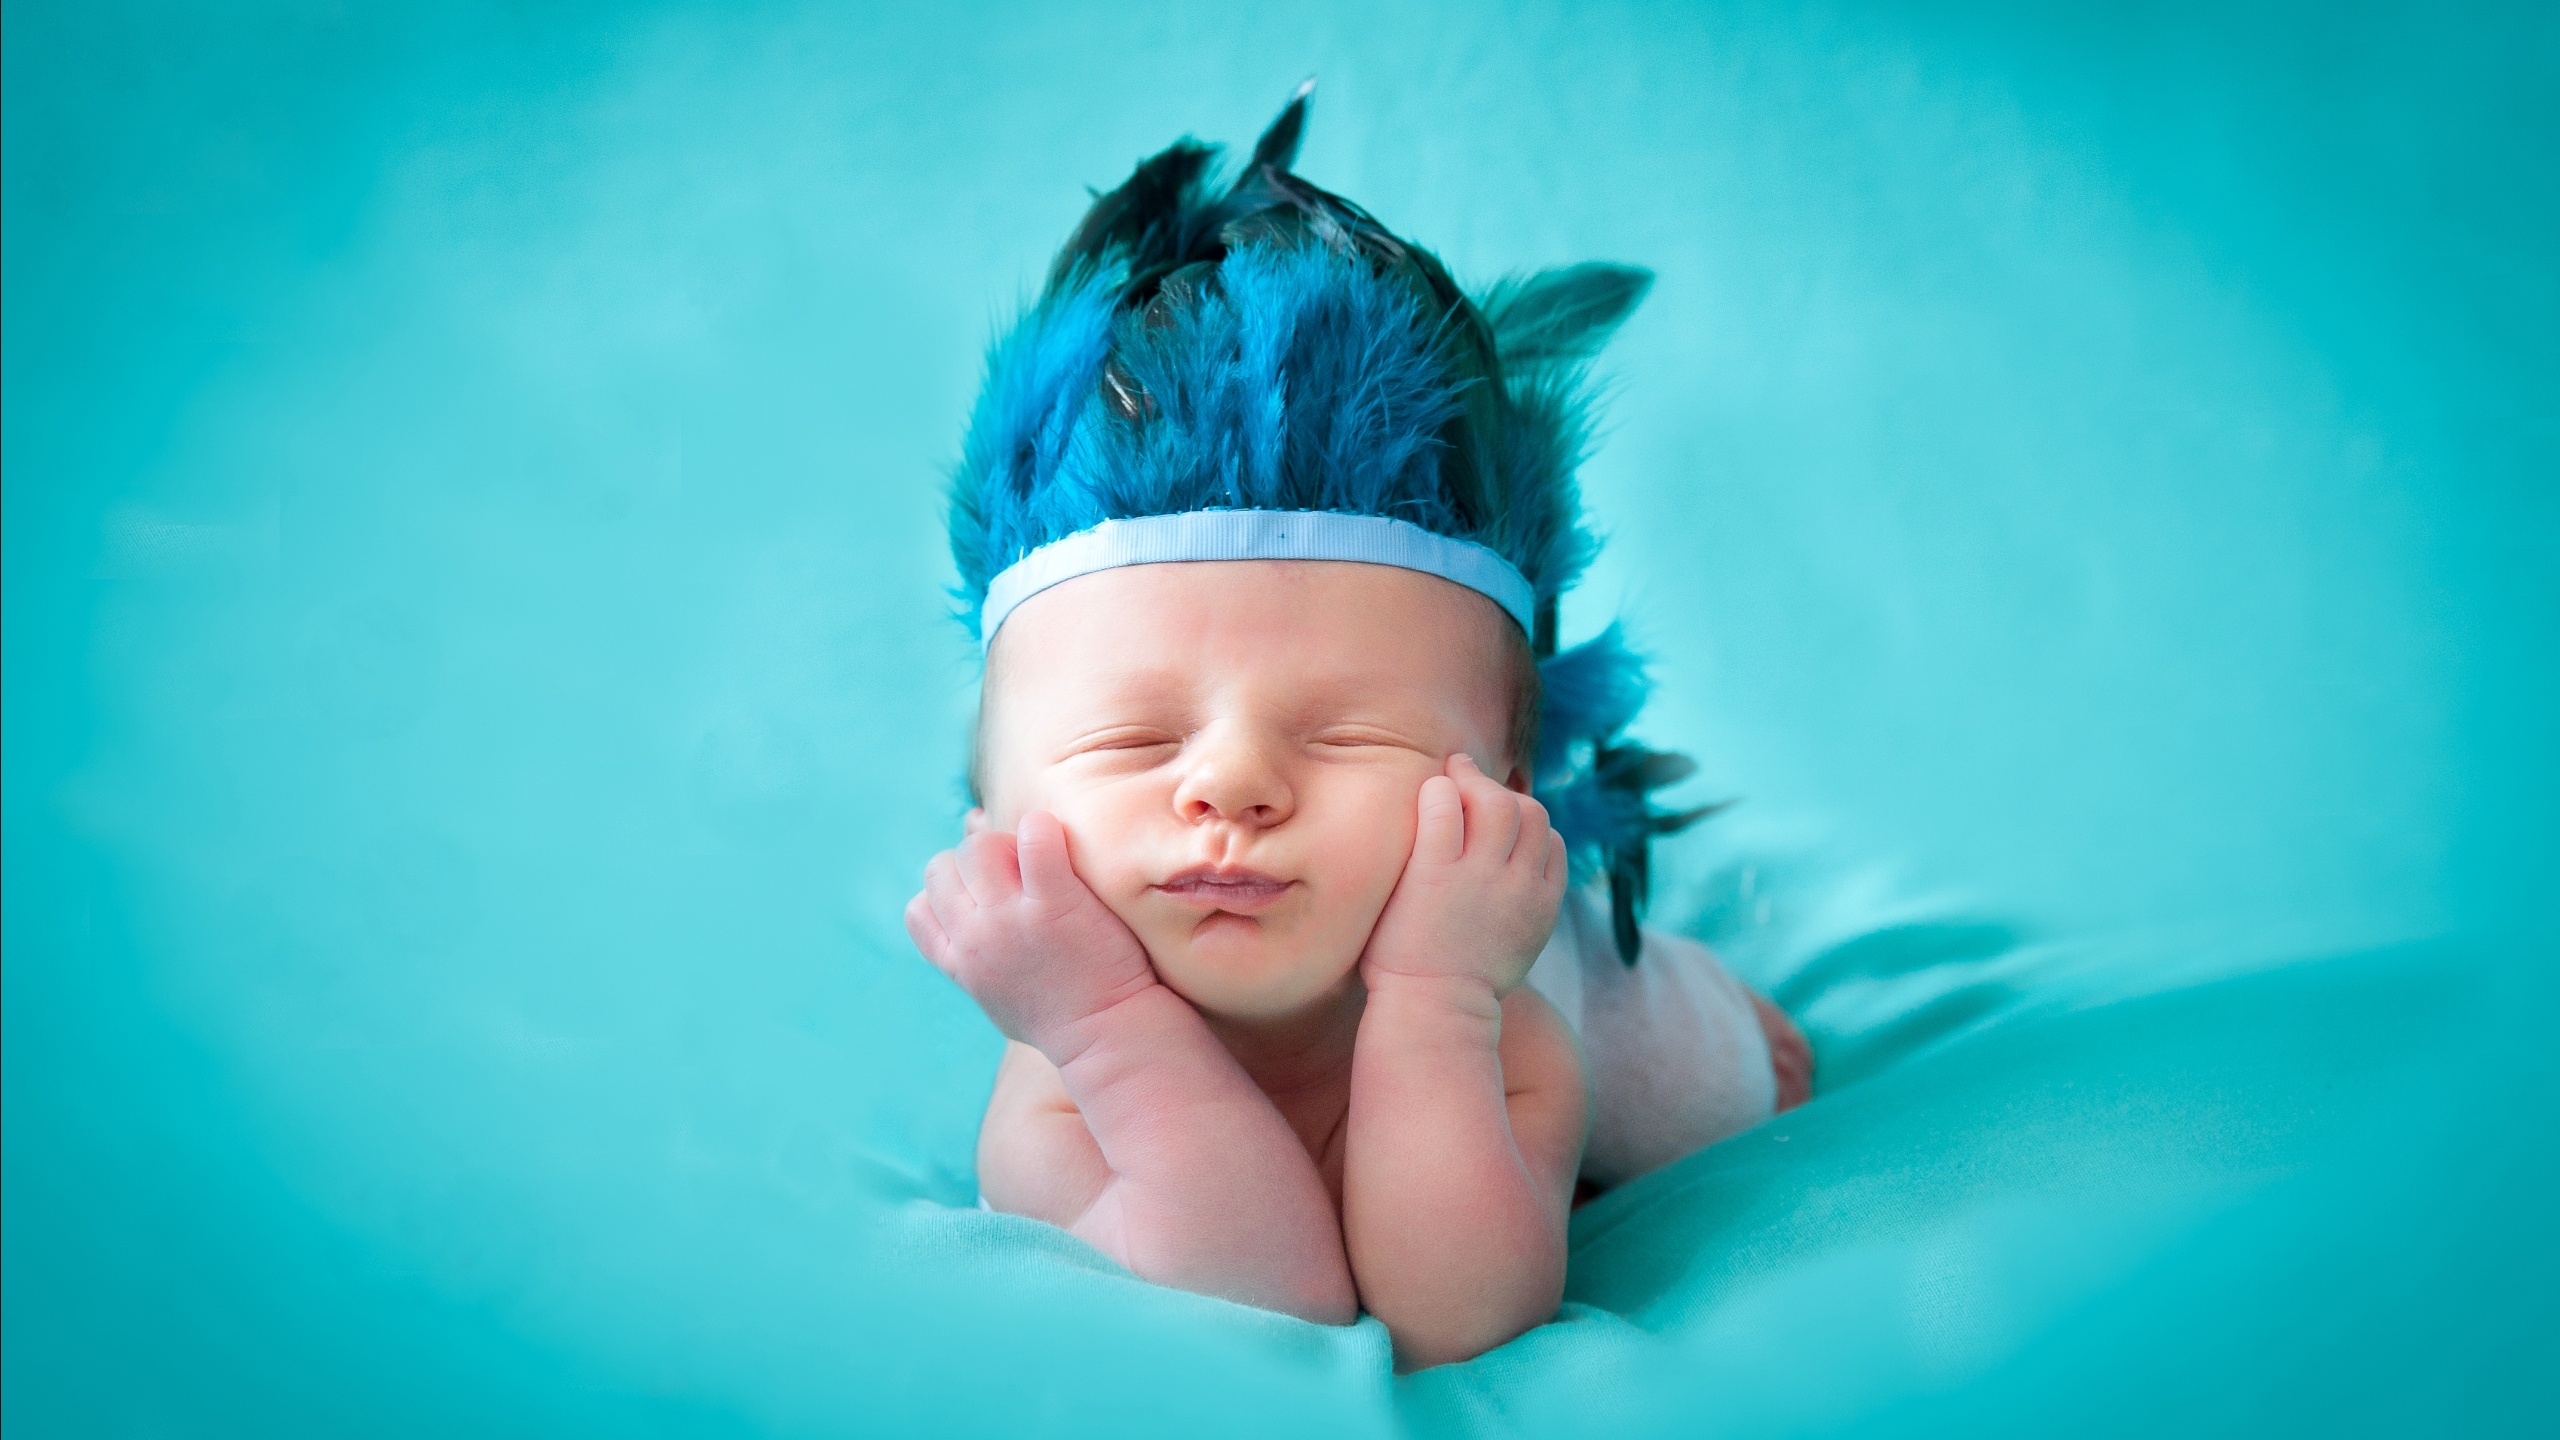 Sweet Indian Baby - New Born Baby Funny Images Hd , HD Wallpaper & Backgrounds